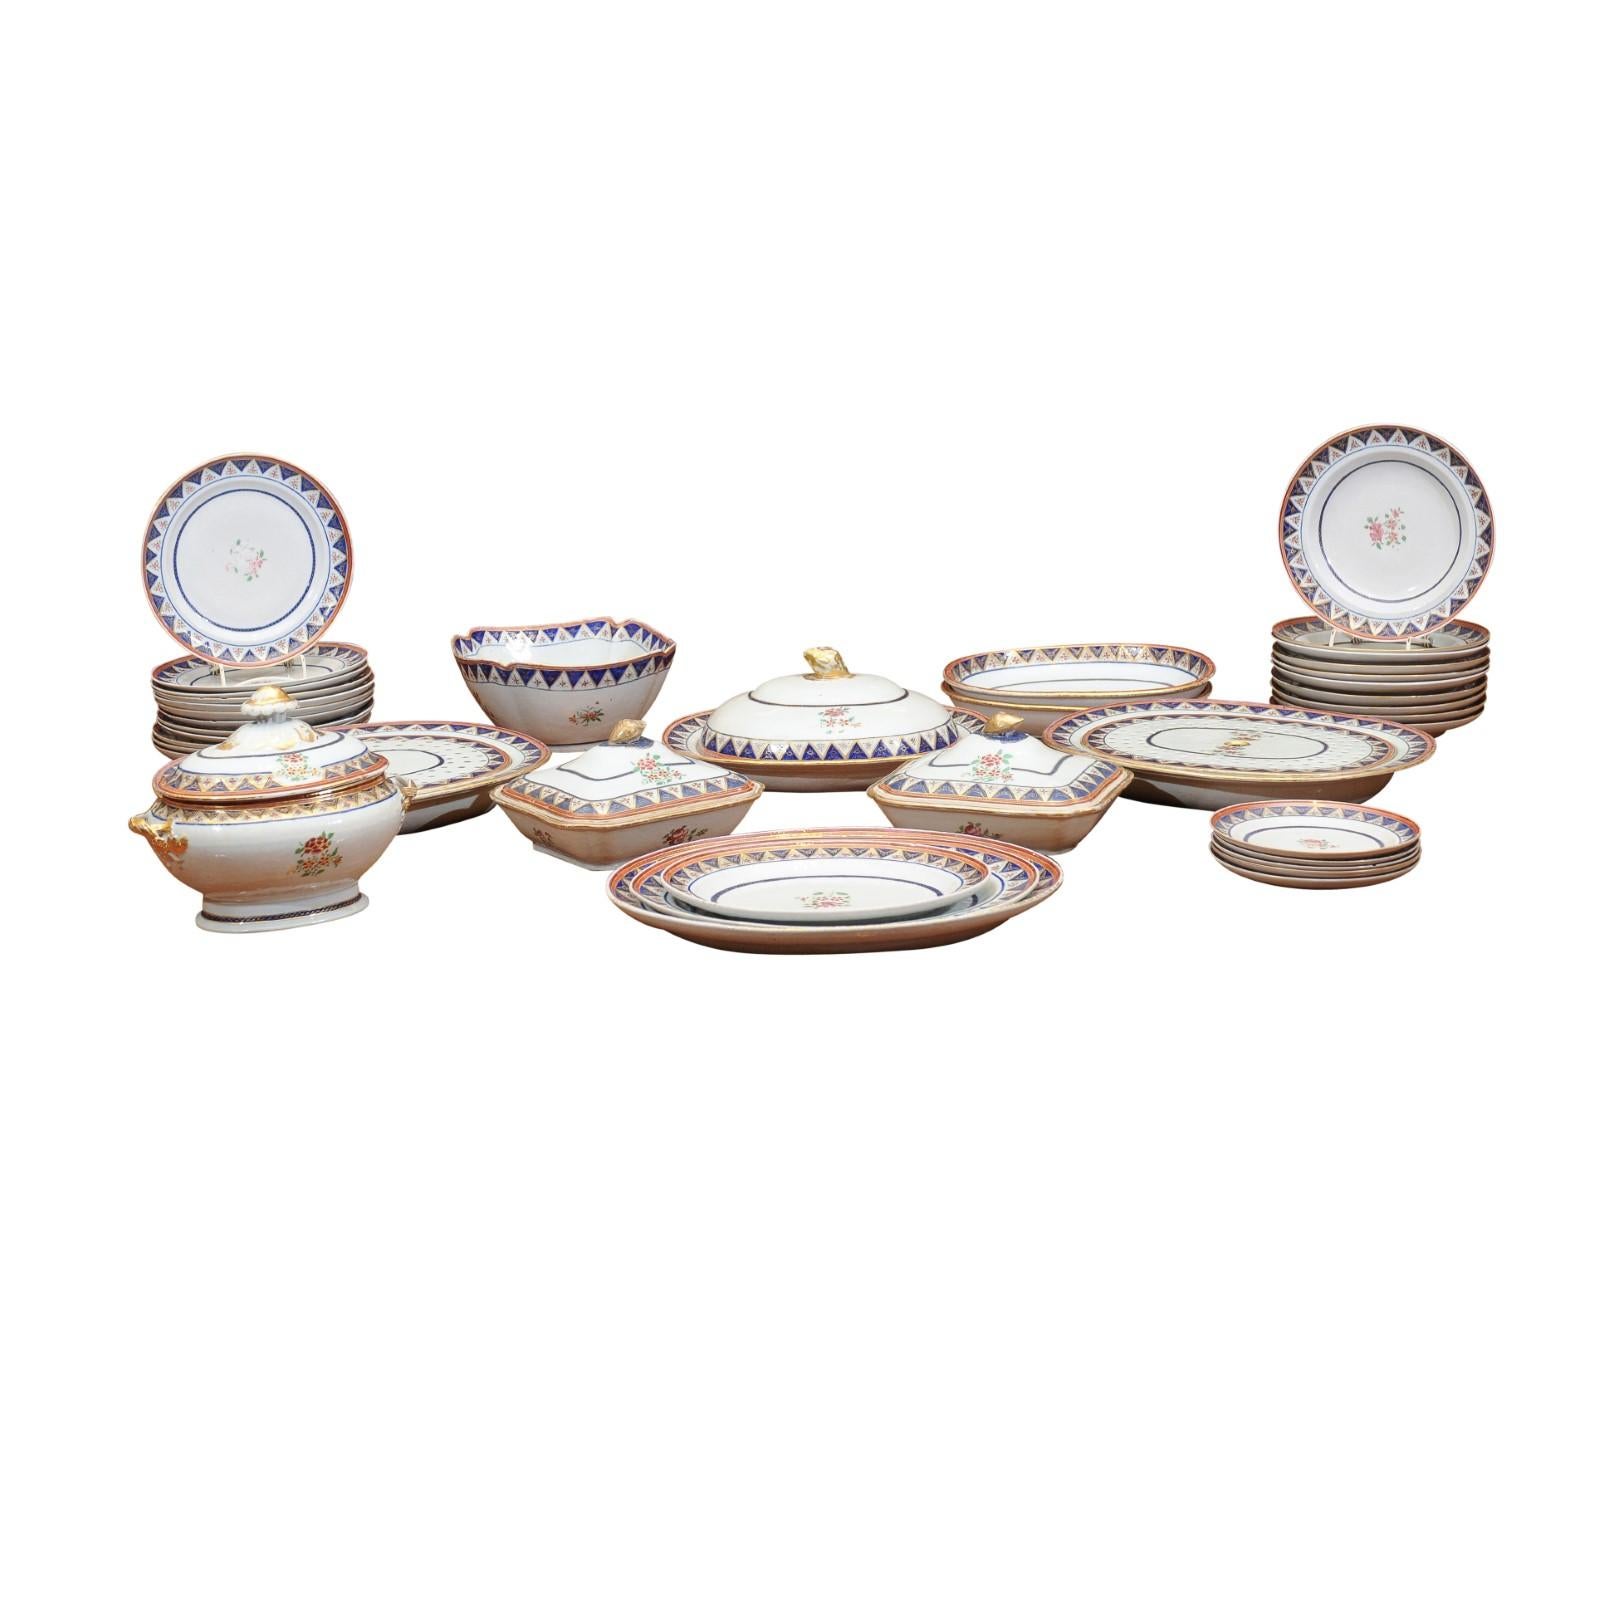 19th C. Chinese Export Famille Rose Porcelain Part-Dinner Service, 45 Piece Set For Sale